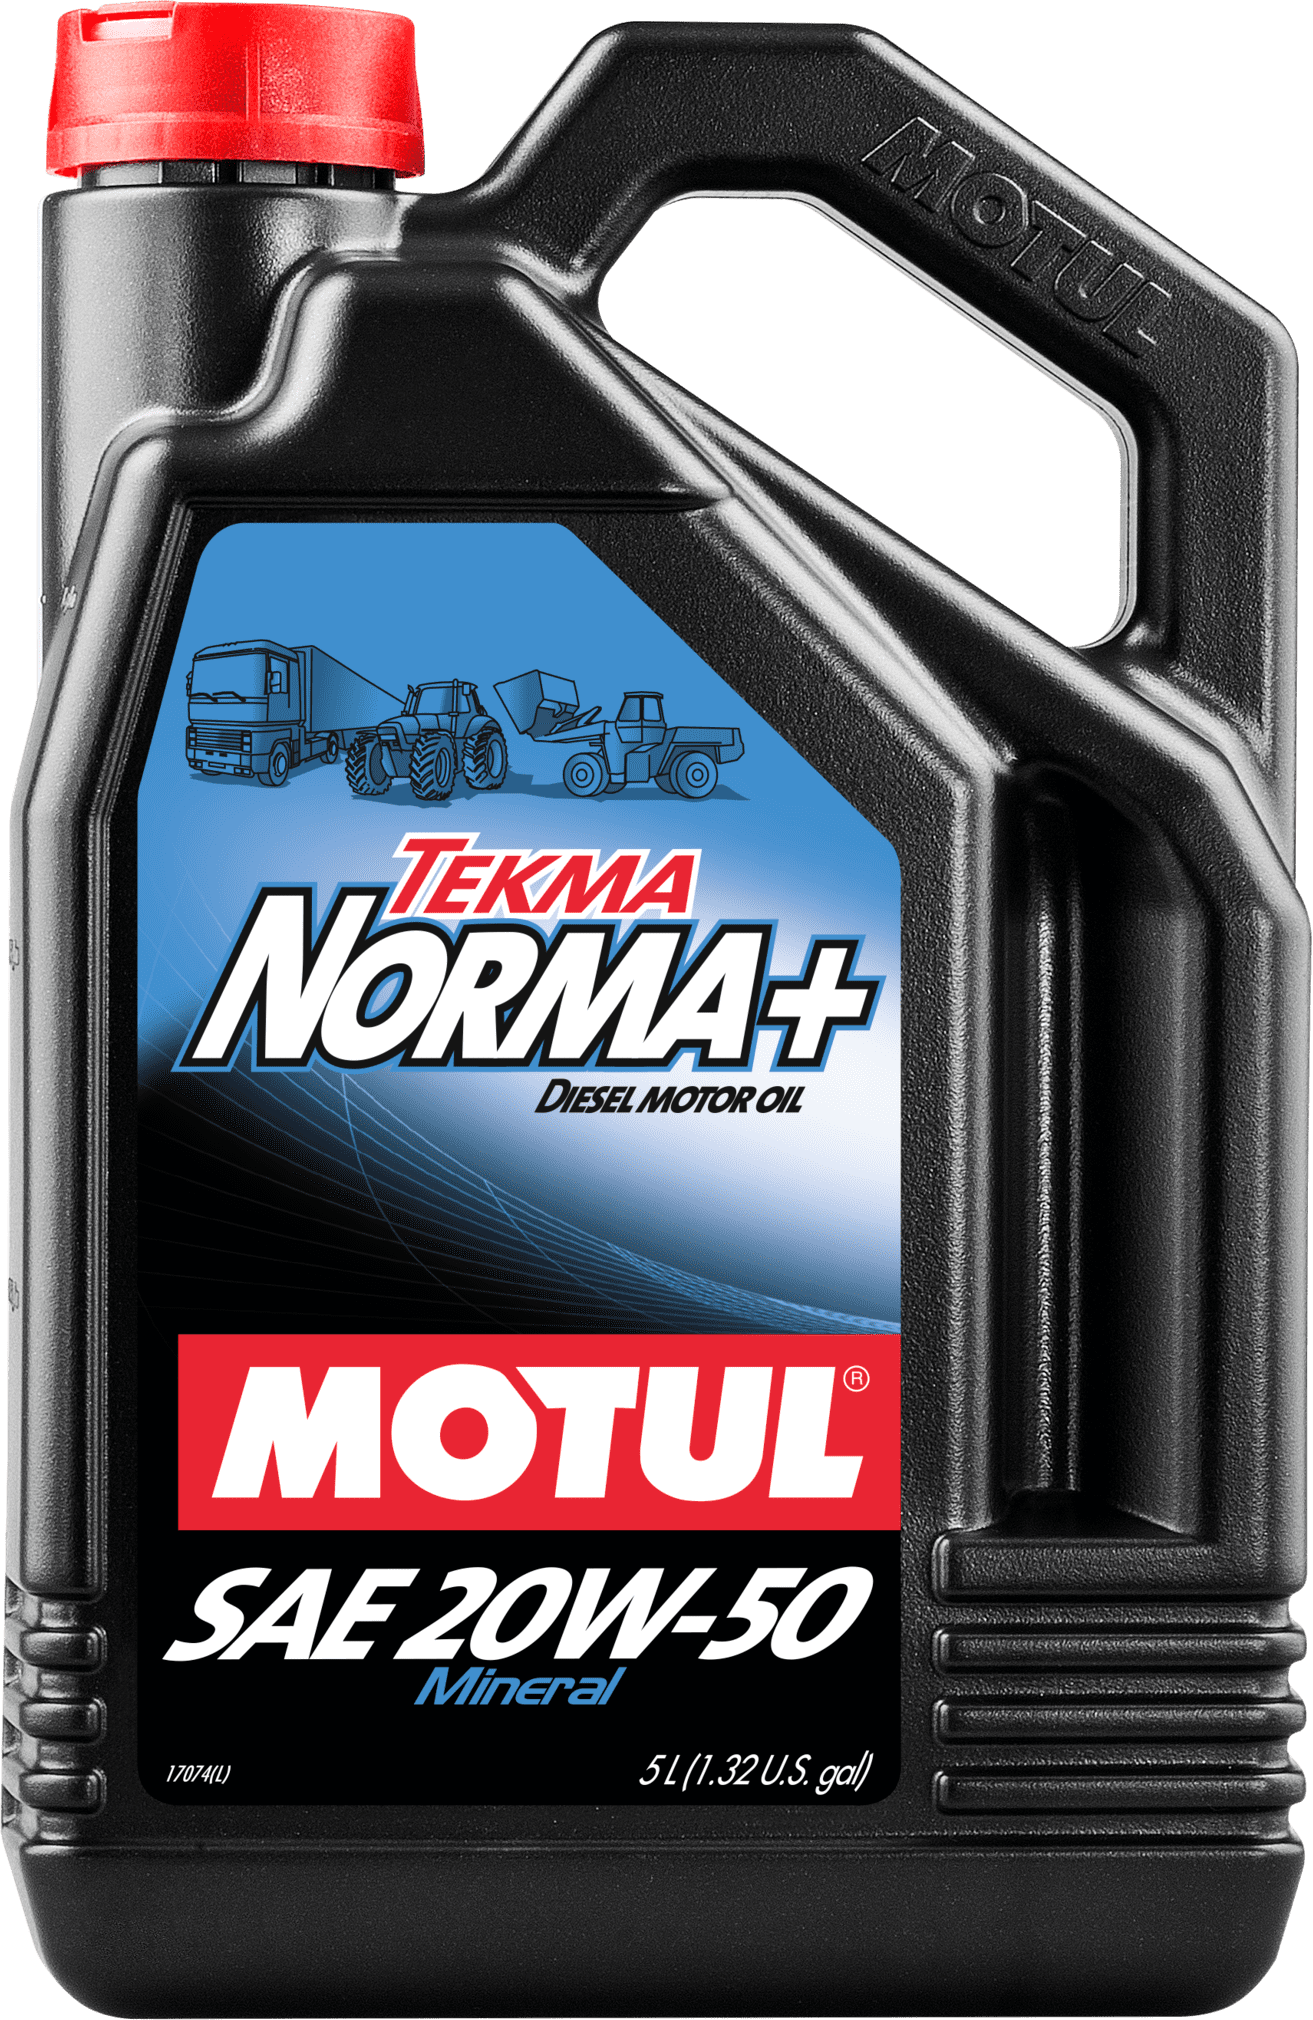 102024-5 Tekma Norma+ 20W-50 is a lubricant for all diesel engines naturally aspirated or turbocharged, operating in warm climates, where manufacturer’s recommendations are API CD, CE, CF, CF-4, CCMC D-4.